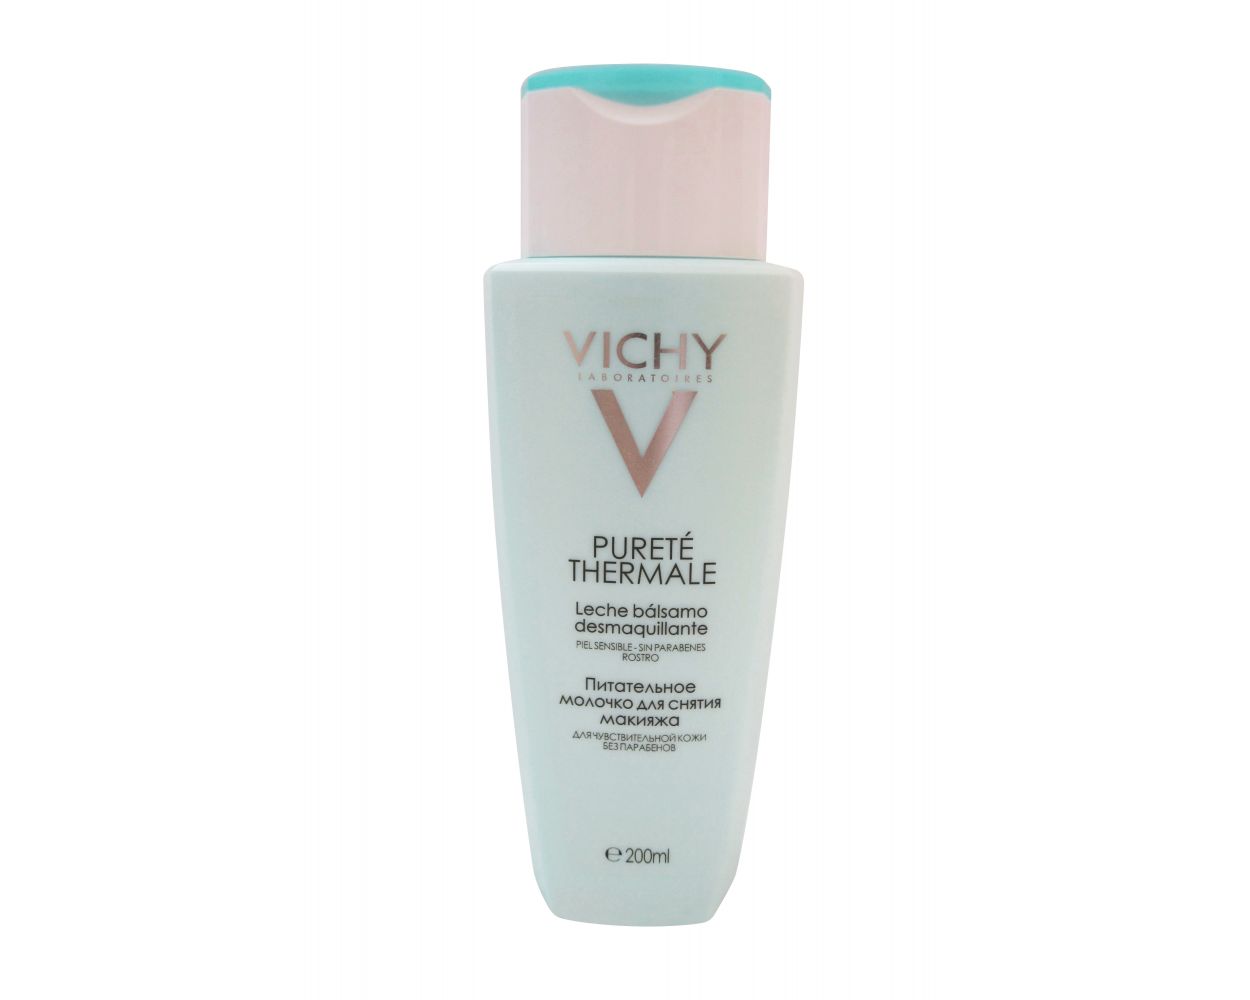 Vichy Purete Thermale Soothing Eye Makeup Remover Sensitive Skin Skincare - Beautyvice.com